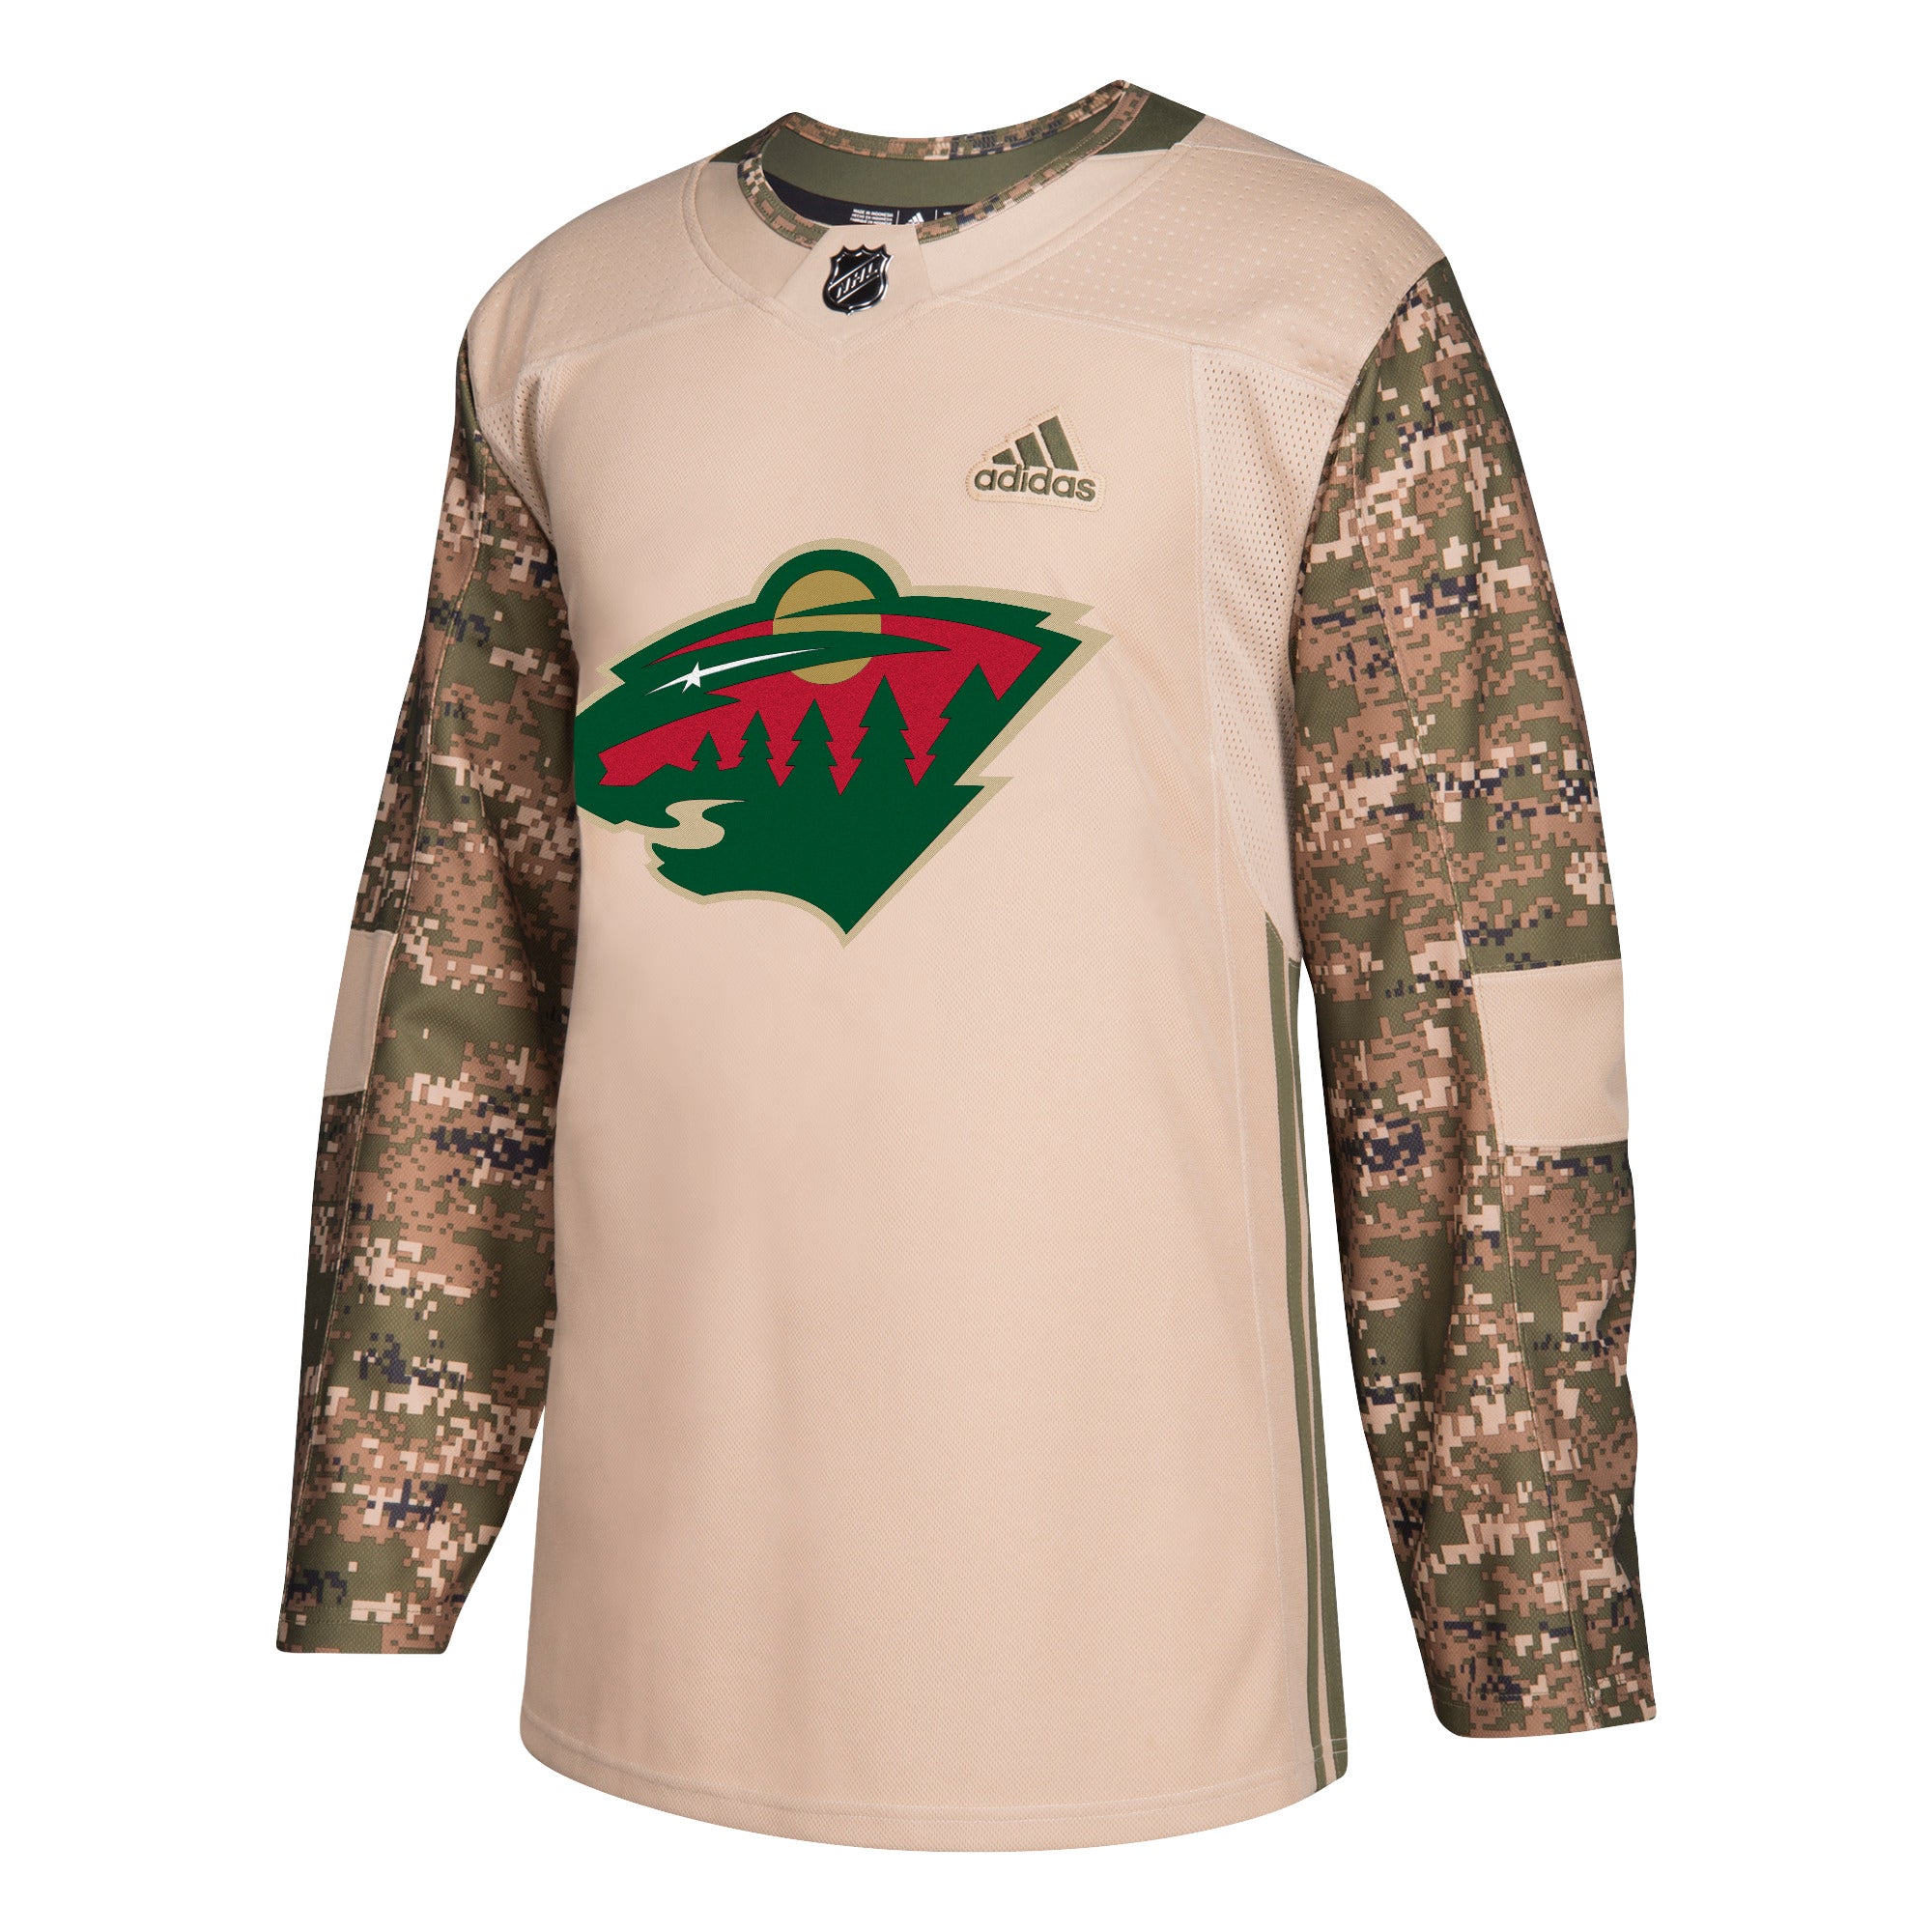 ANY NAME AND NUMBER MINNESOTA WILD HOME AUTHENTIC ADIDAS NHL JERSEY (C –  Hockey Authentic